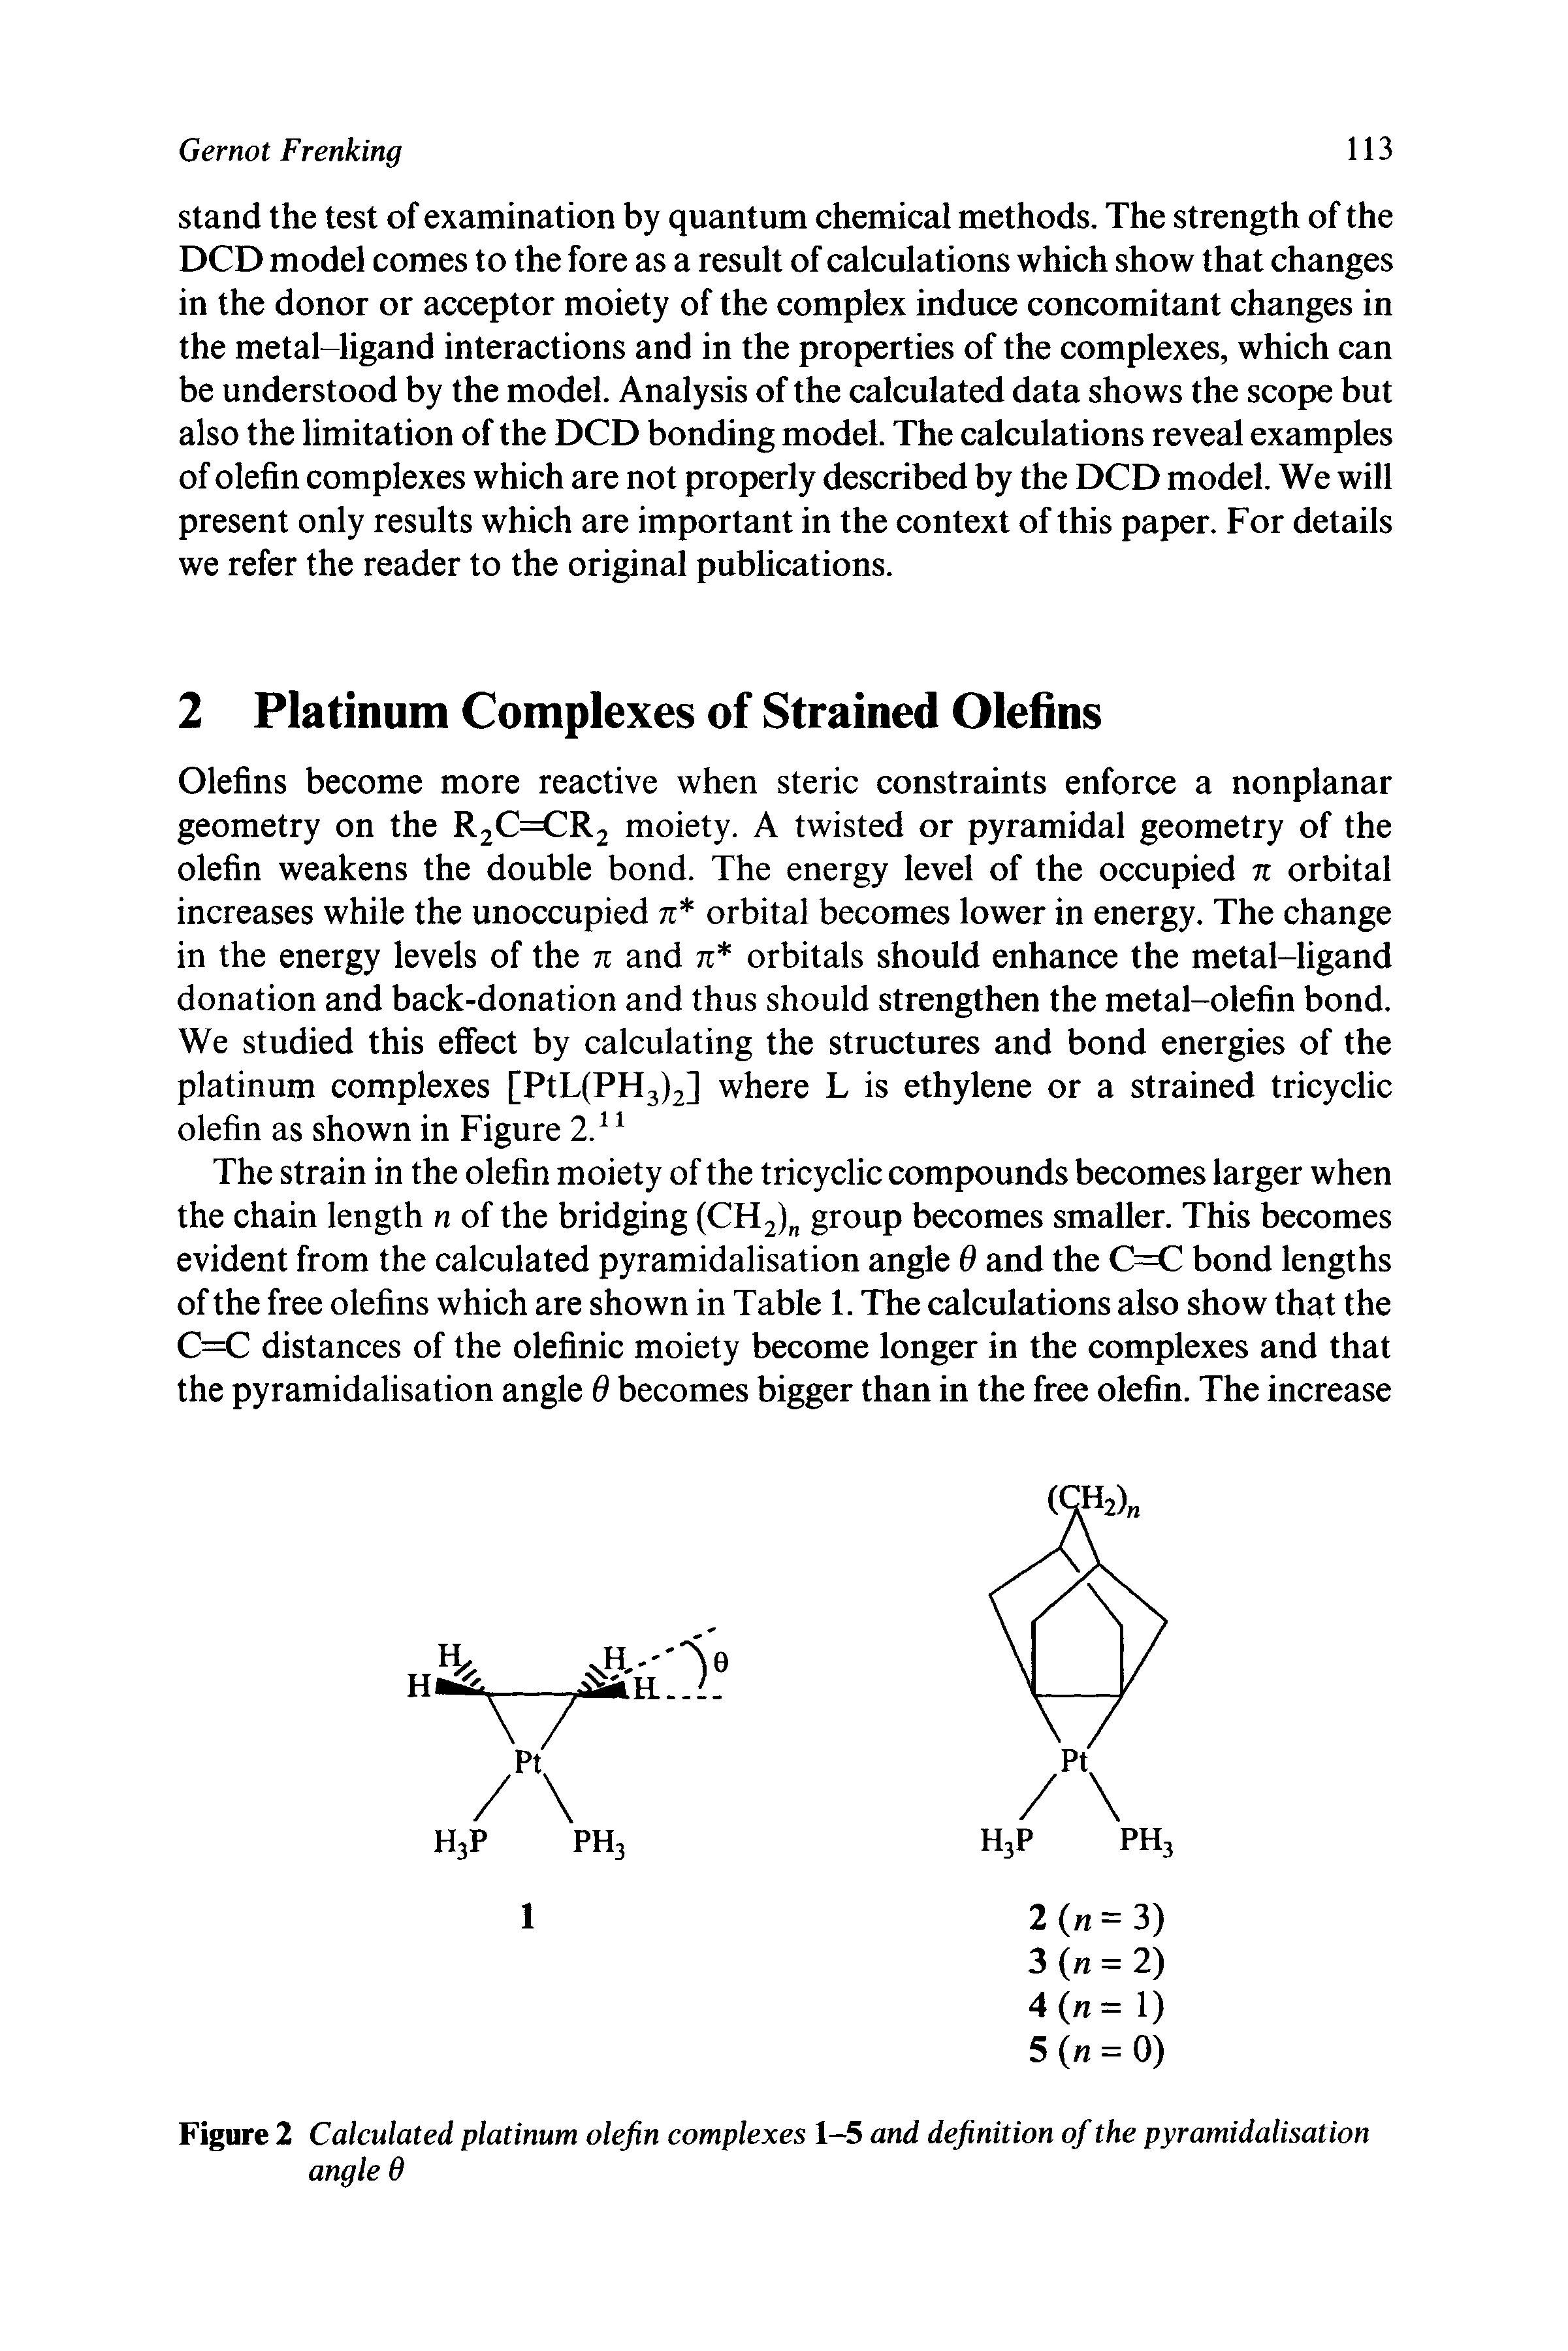 Figure 2 Calculated platinum olefin complexes 1—5 and definition of the pyramidalisation angle 6...